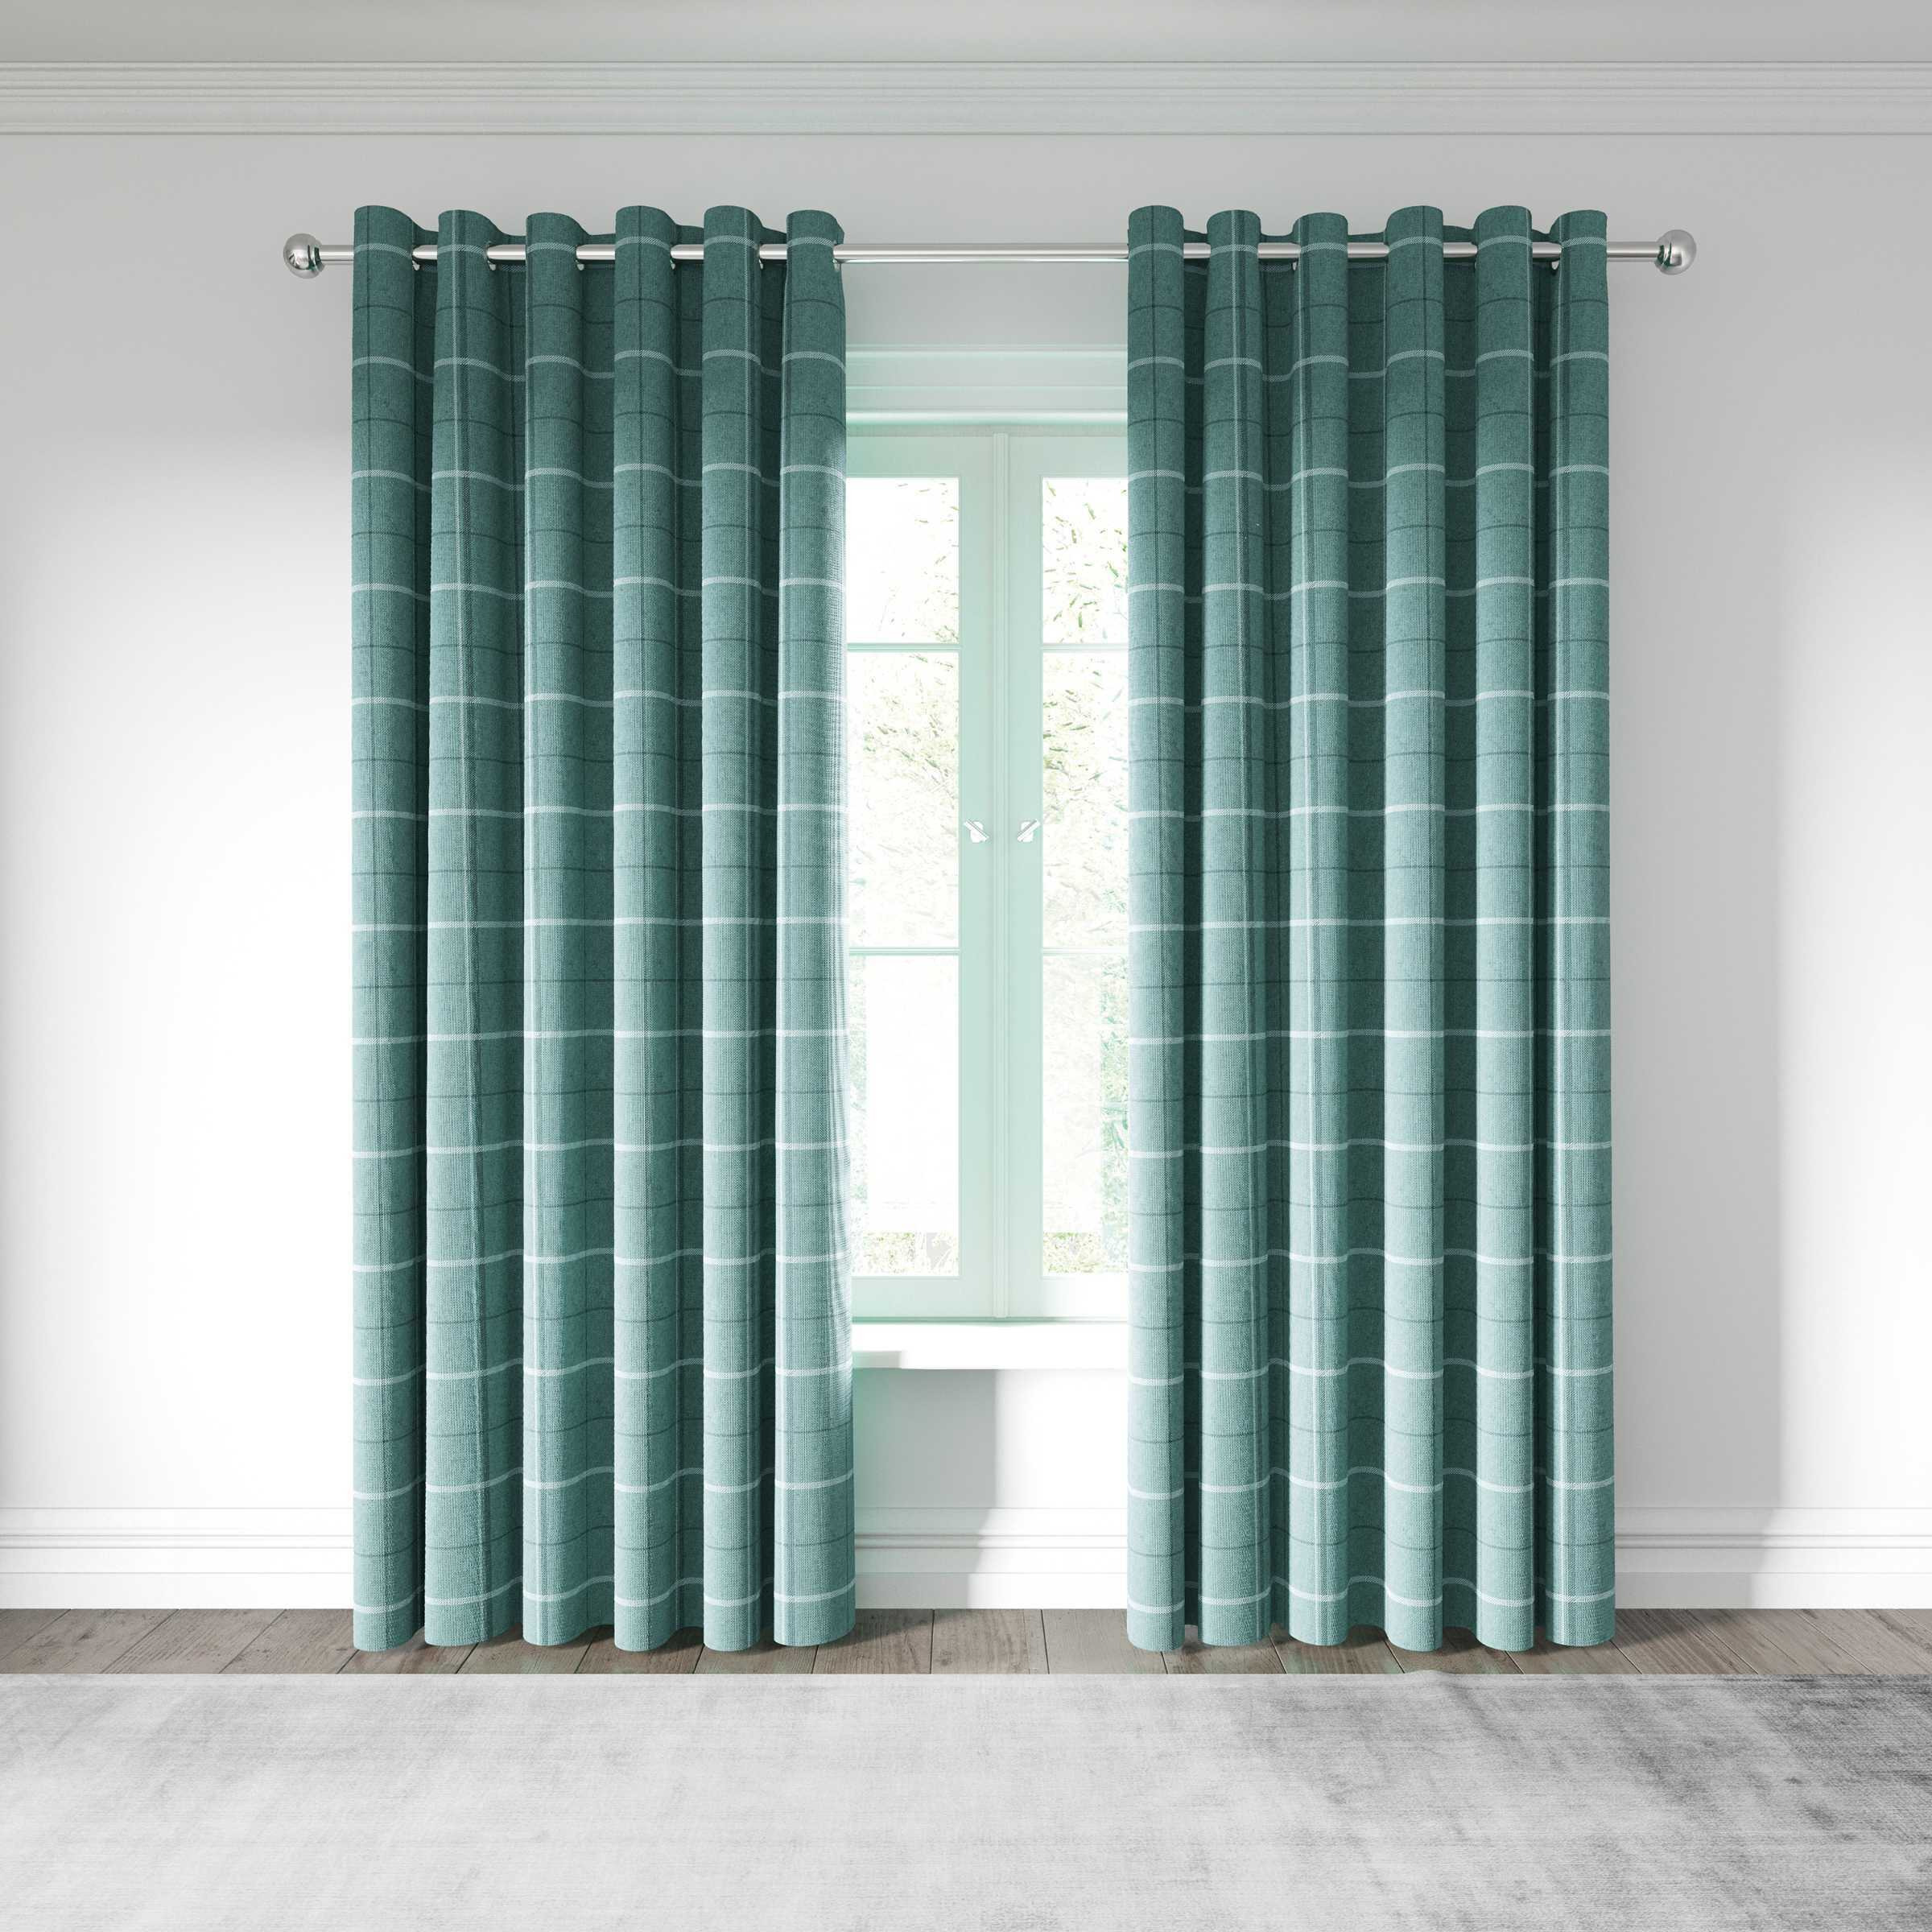 "Helena Springfield Harper Lined Curtains 66"" x 54"", Duck Egg" - image 1